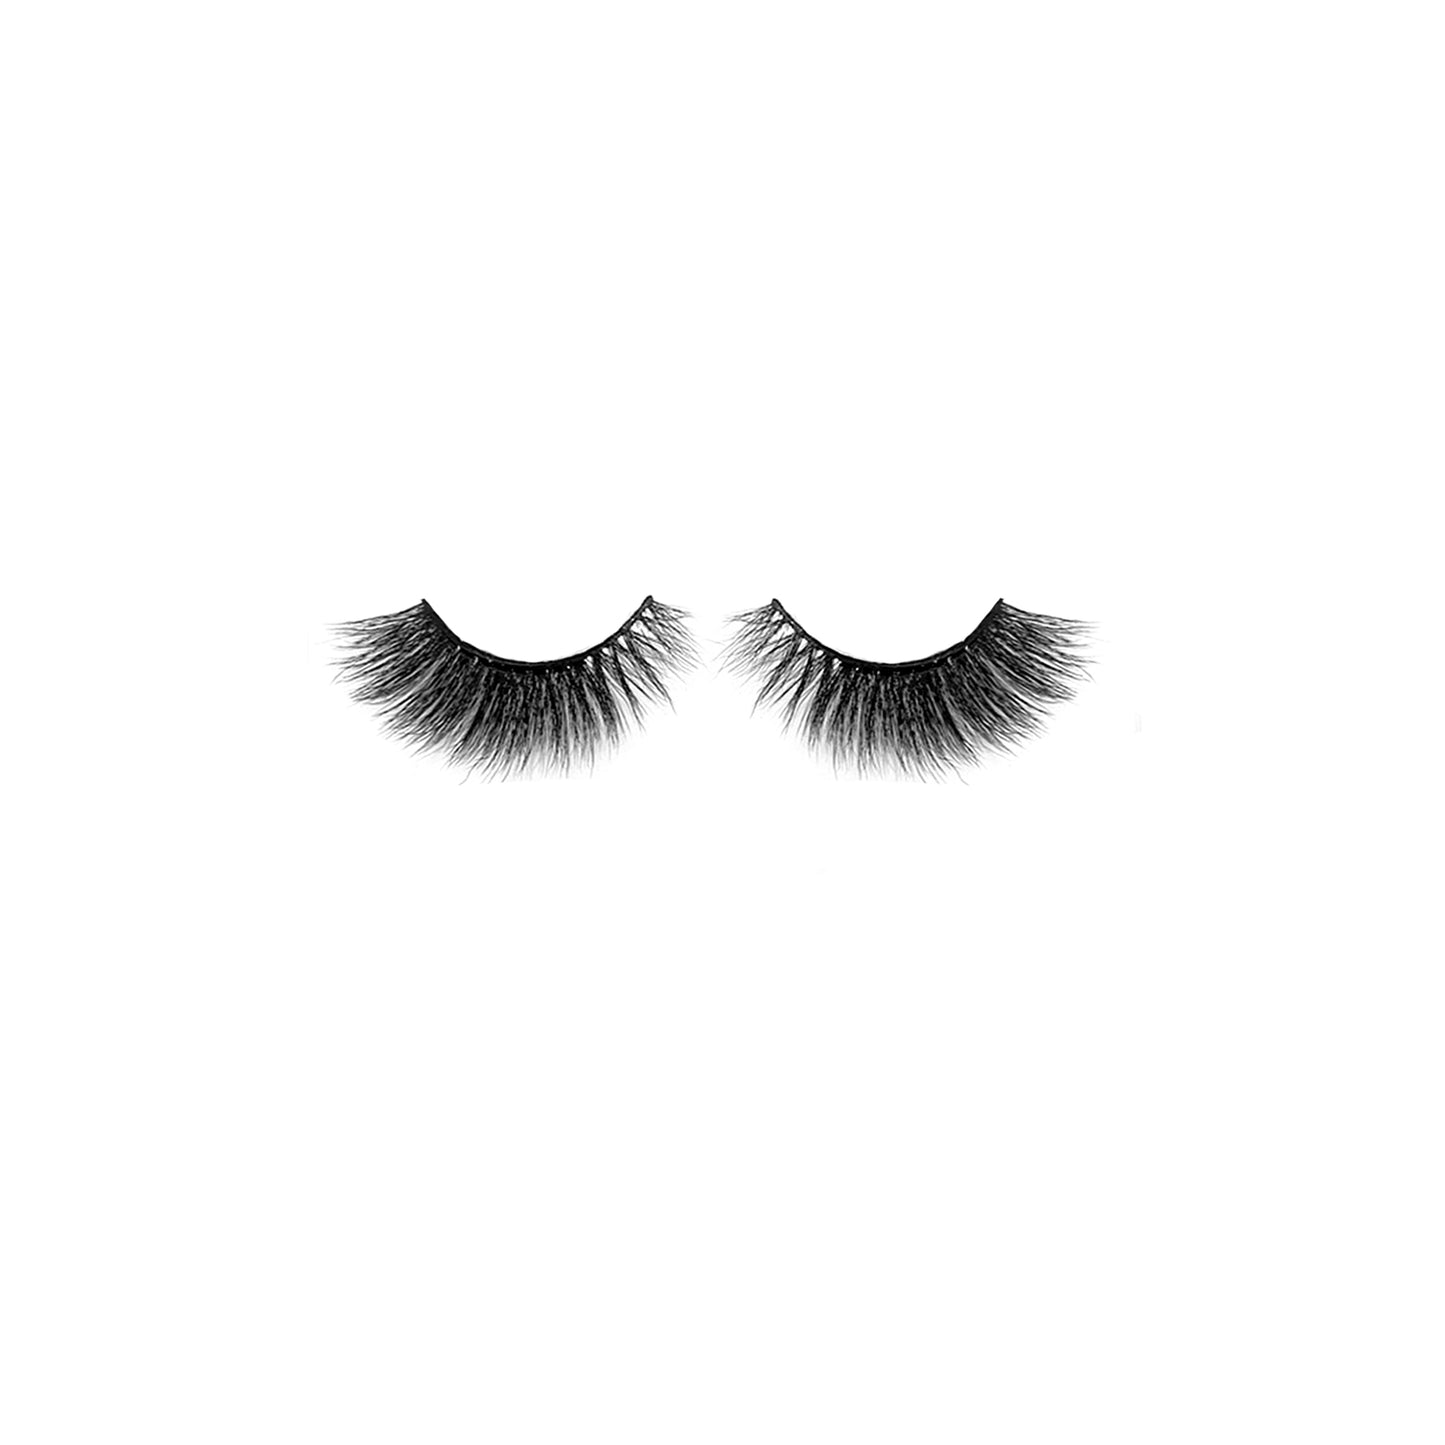 SPOOKY GIRL LASHES (FAUX MINK)